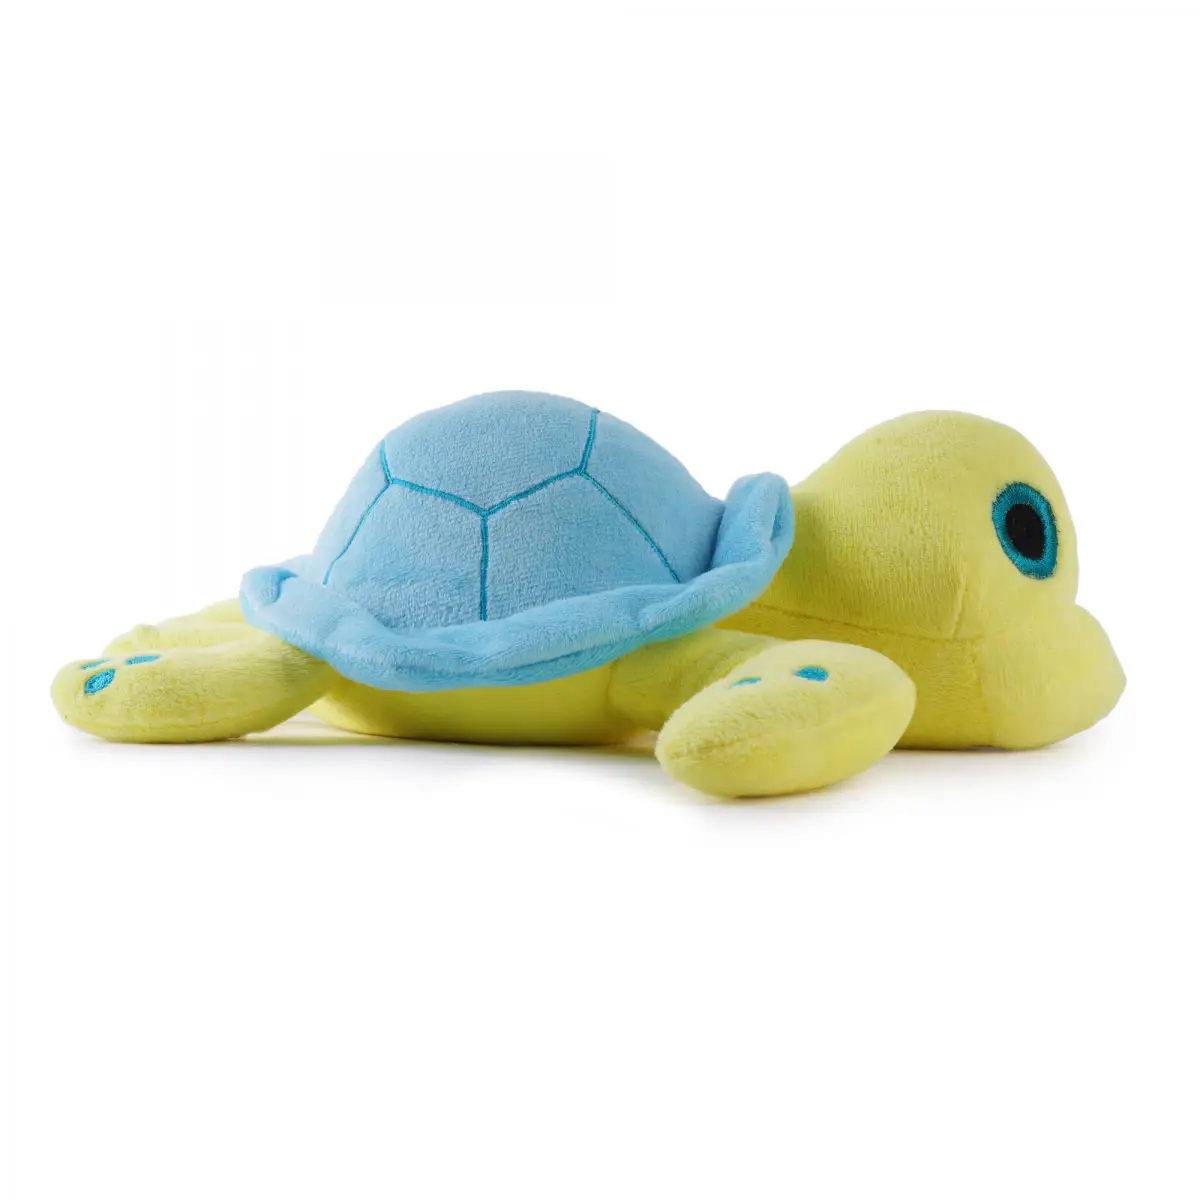 Huggable Cuddly Lucky Turtle Stuffed Toy By Fuzzbuzz, Soft Toys for Kids, Cute Plushies Blue, For Kids Of Age 2 Years & Above